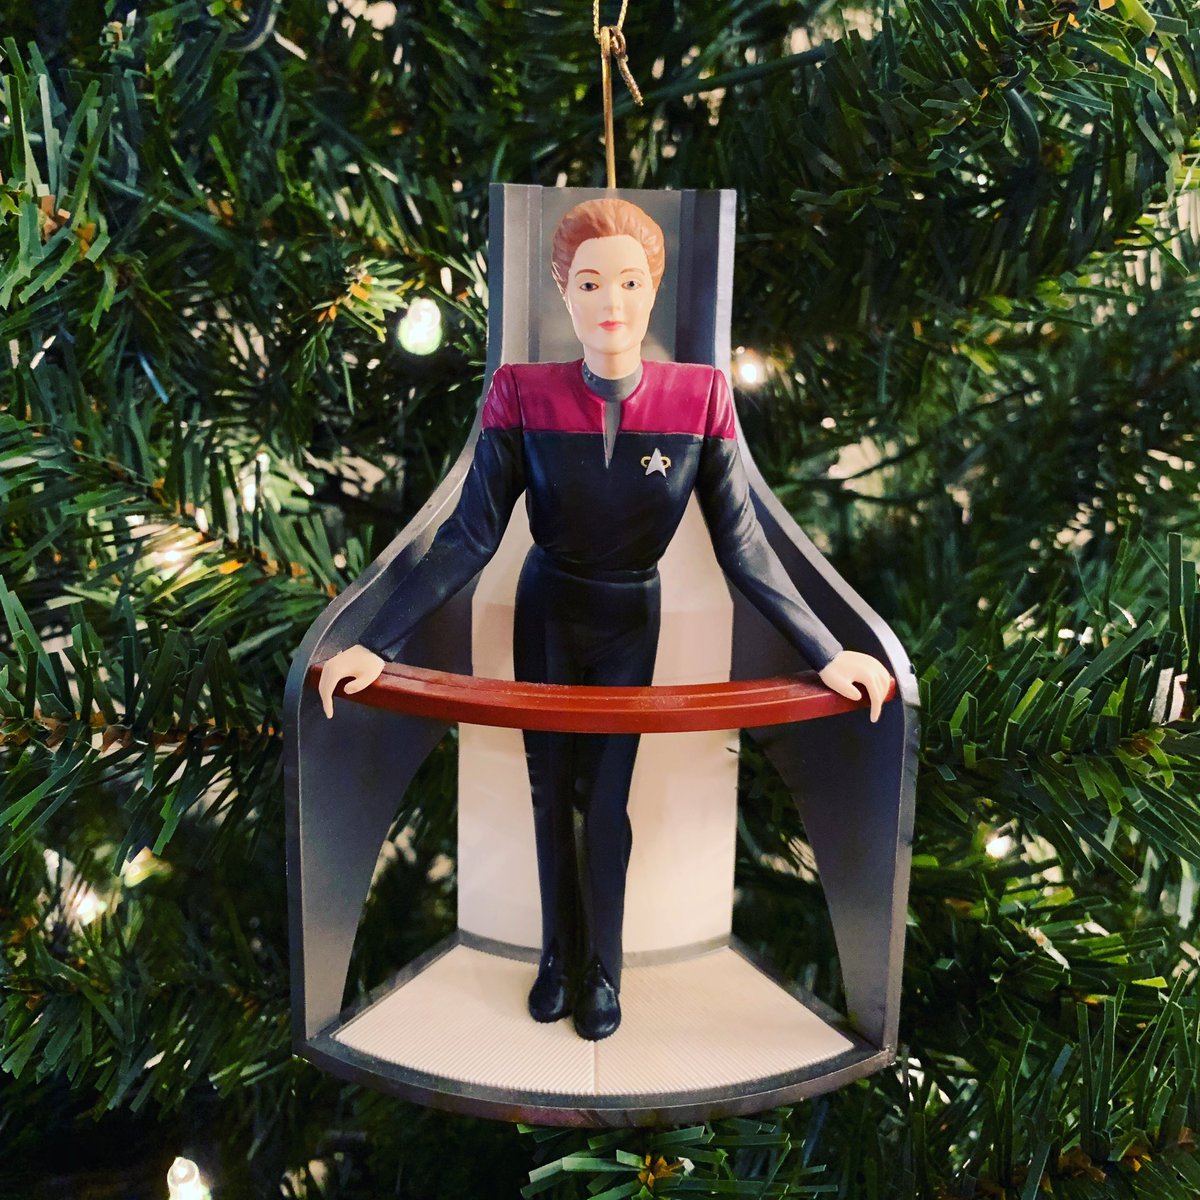 Some holiday cheer courtesy of Captain Janeway and this classic @Hallmark ornament. Are you preparing for the holidays too? 🎄🎁#merryandbright #engage